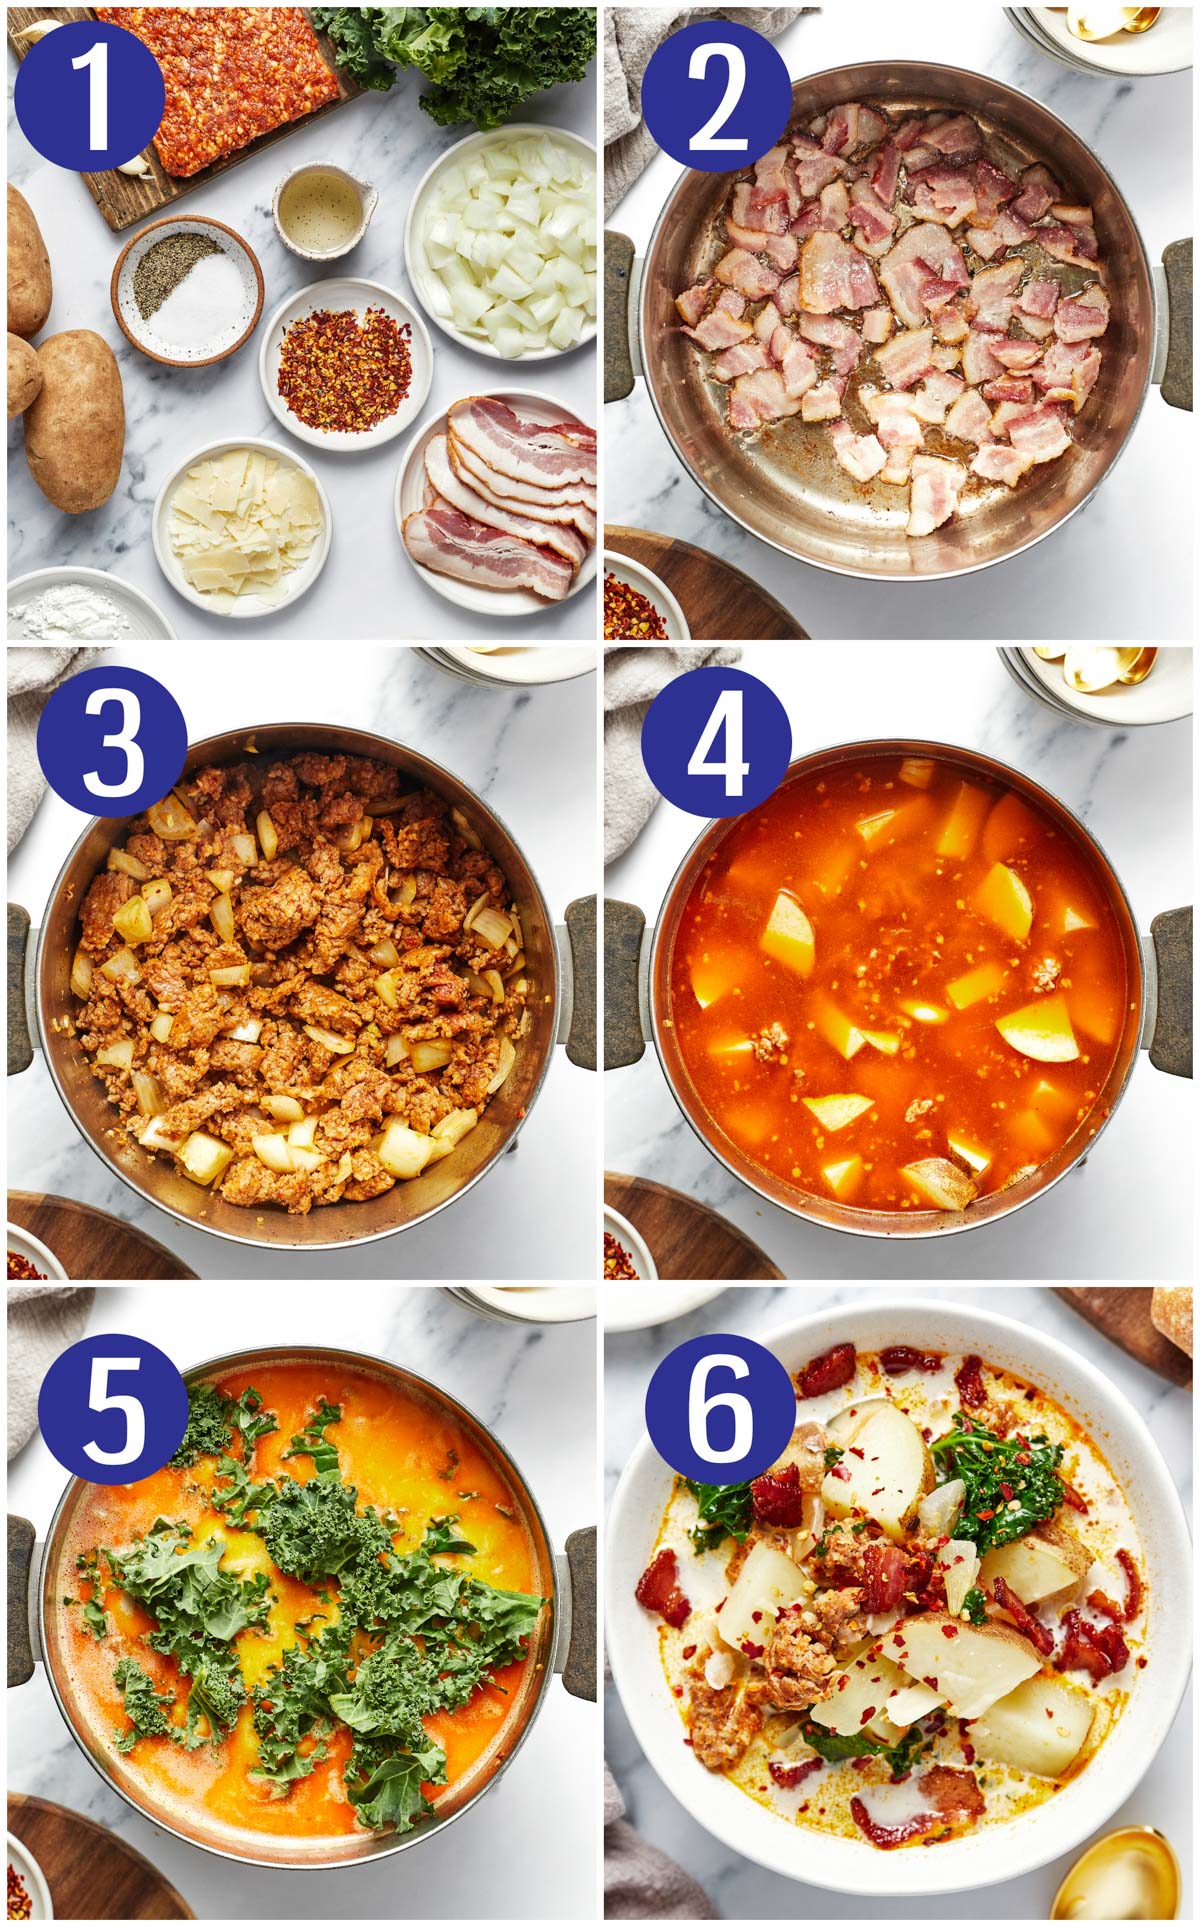 Step by step collage for Zuppa Toscana: ingredients, browning bacon, browning sausage, adding in chicken stock and potatoes, adding in cream, cornstarch, and kale, finished dish.  